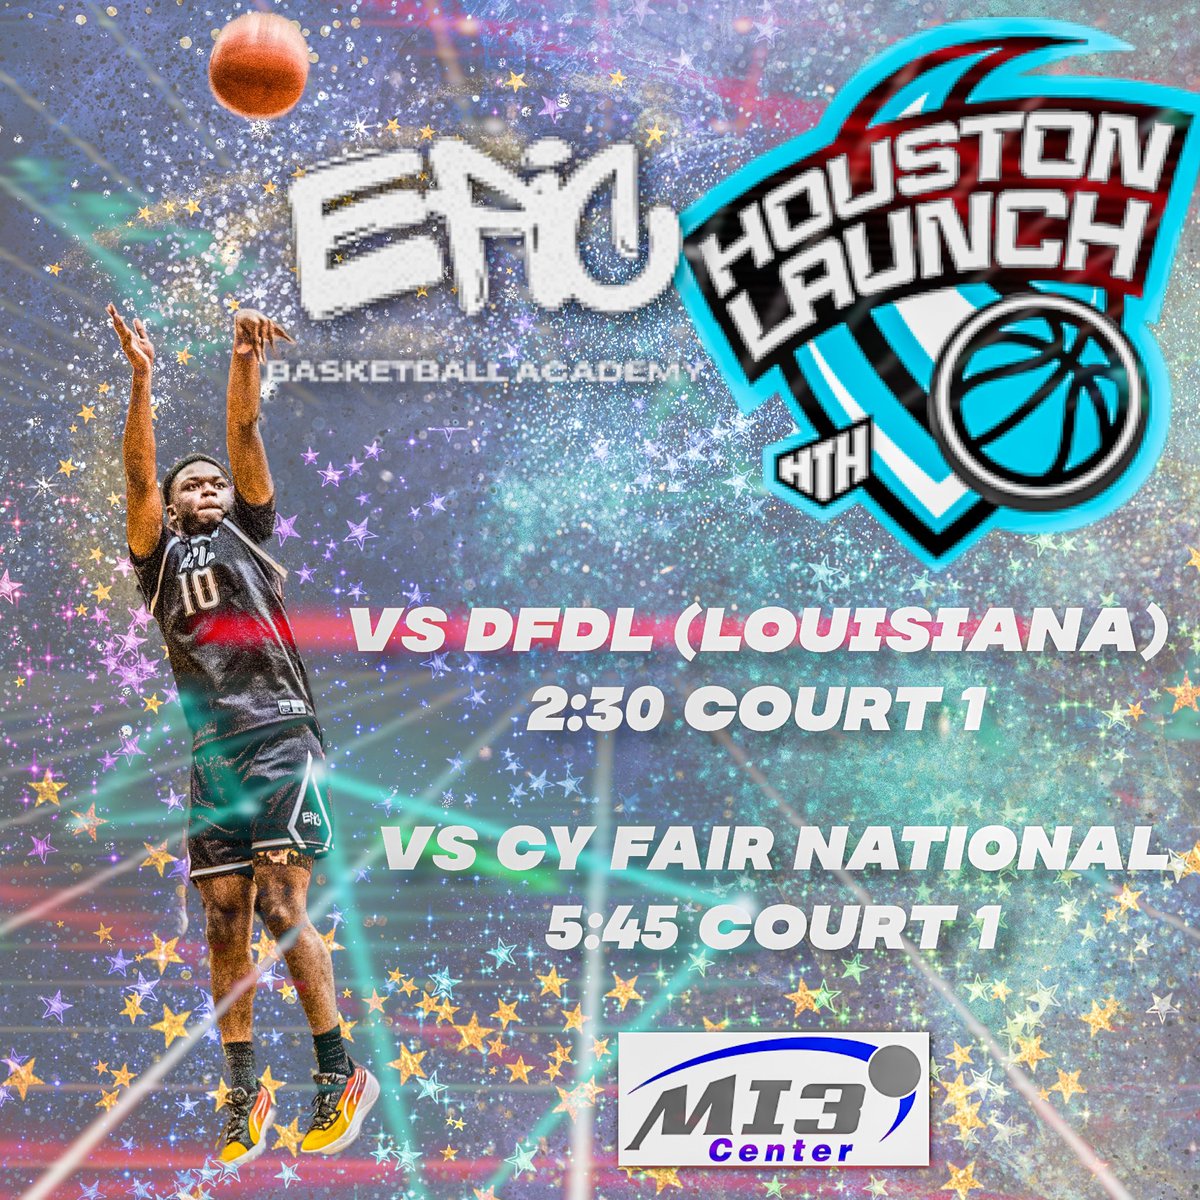 Covering @EPICacademytx @HiTopHoops on Saturday